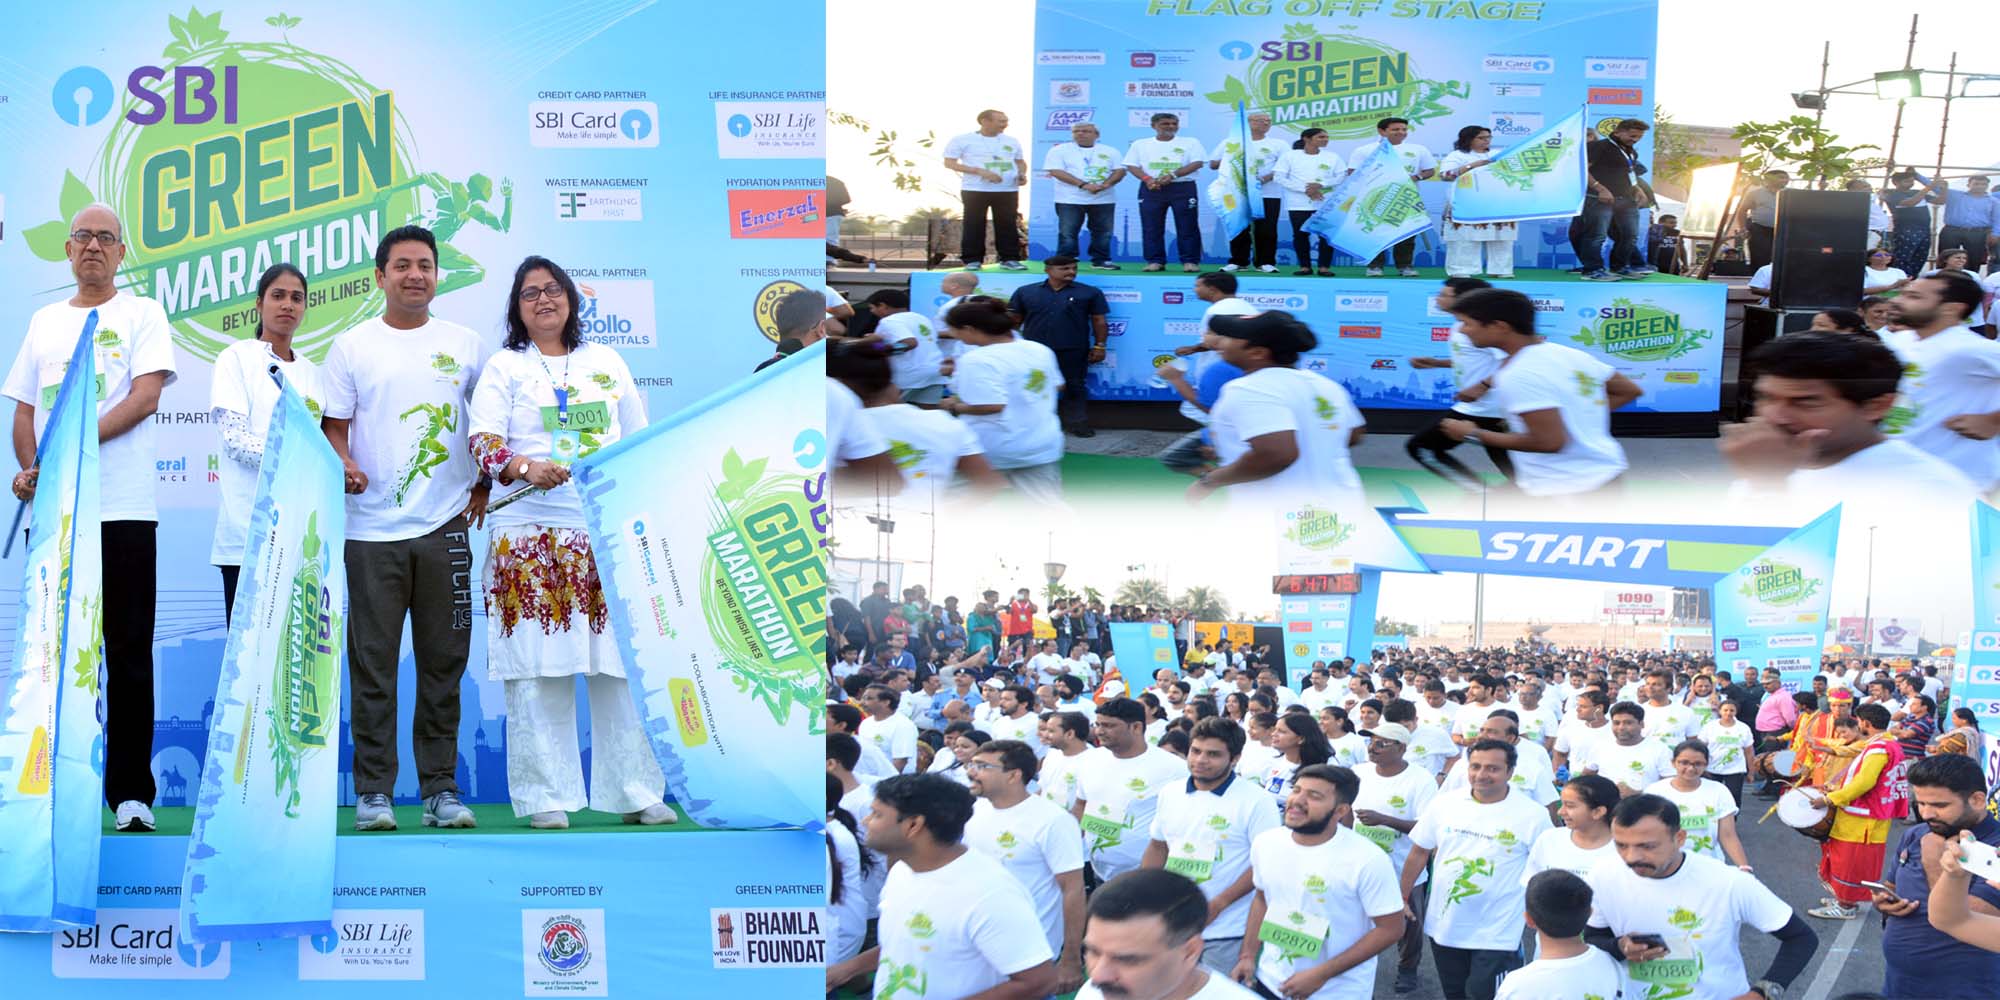 SBI Group Flags off Its 2nd Edition 'SBI Green Marathon' to Promote Sustainability